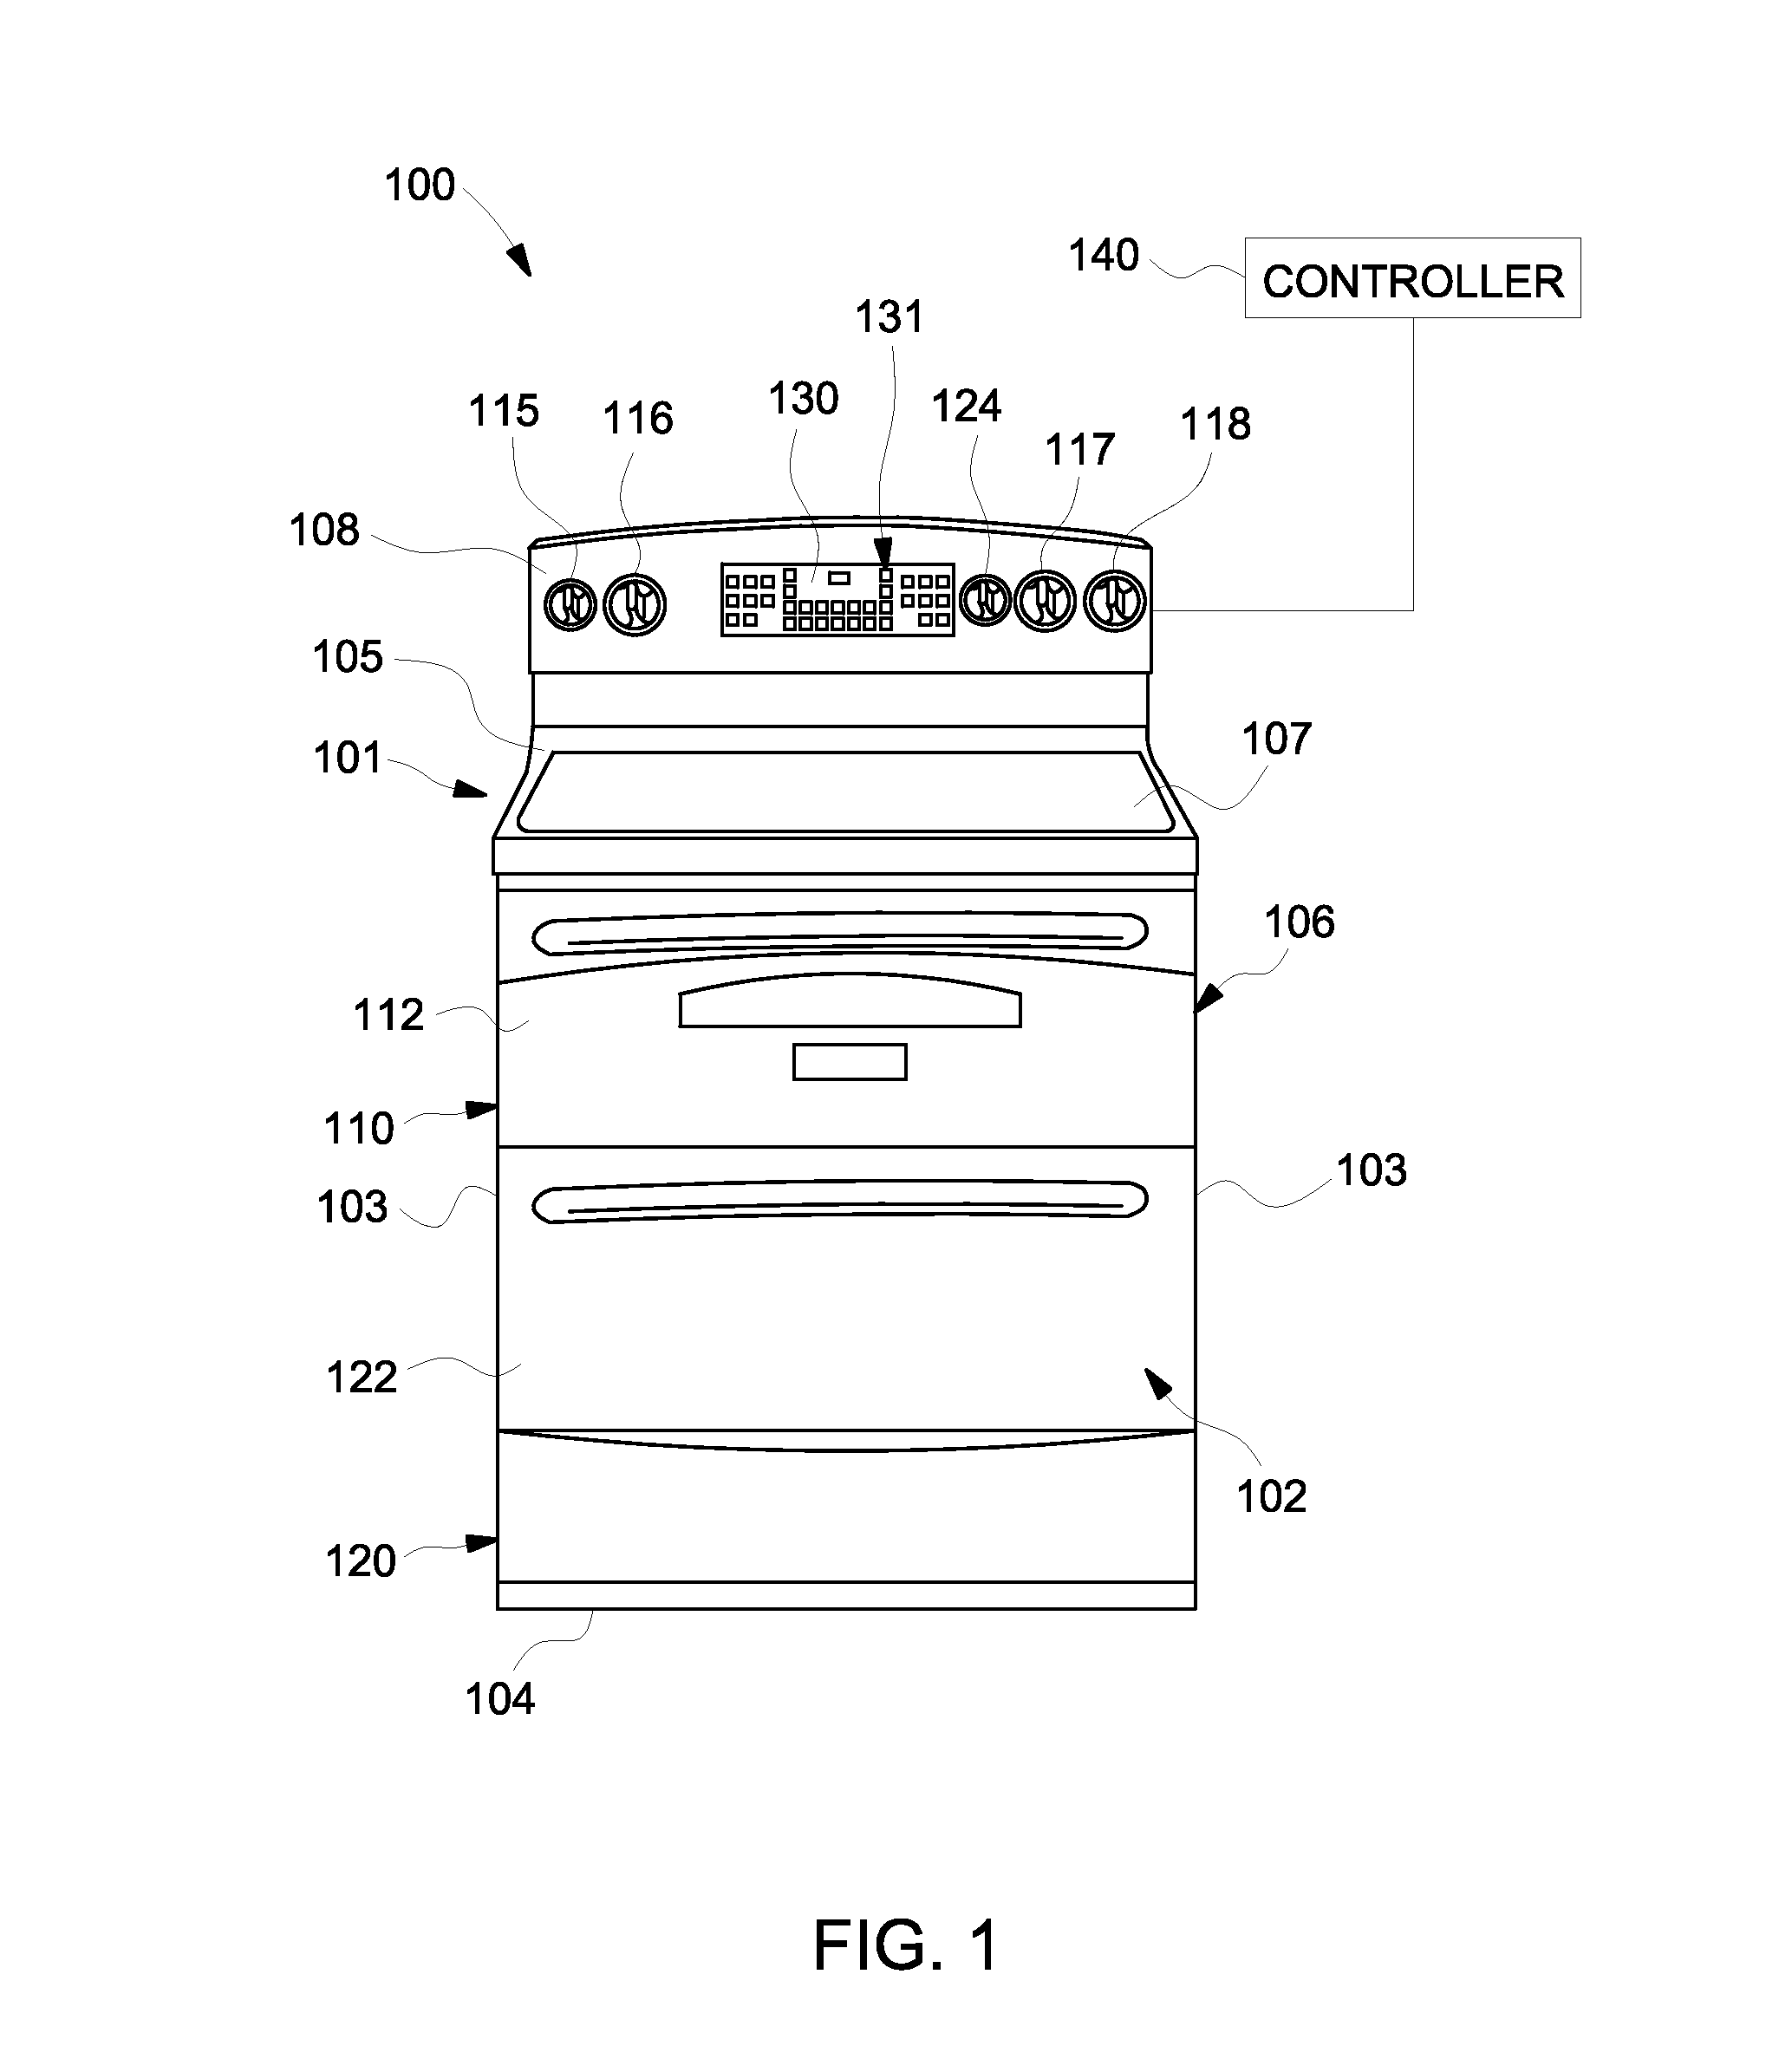 Control system for a self cleaning oven appliance